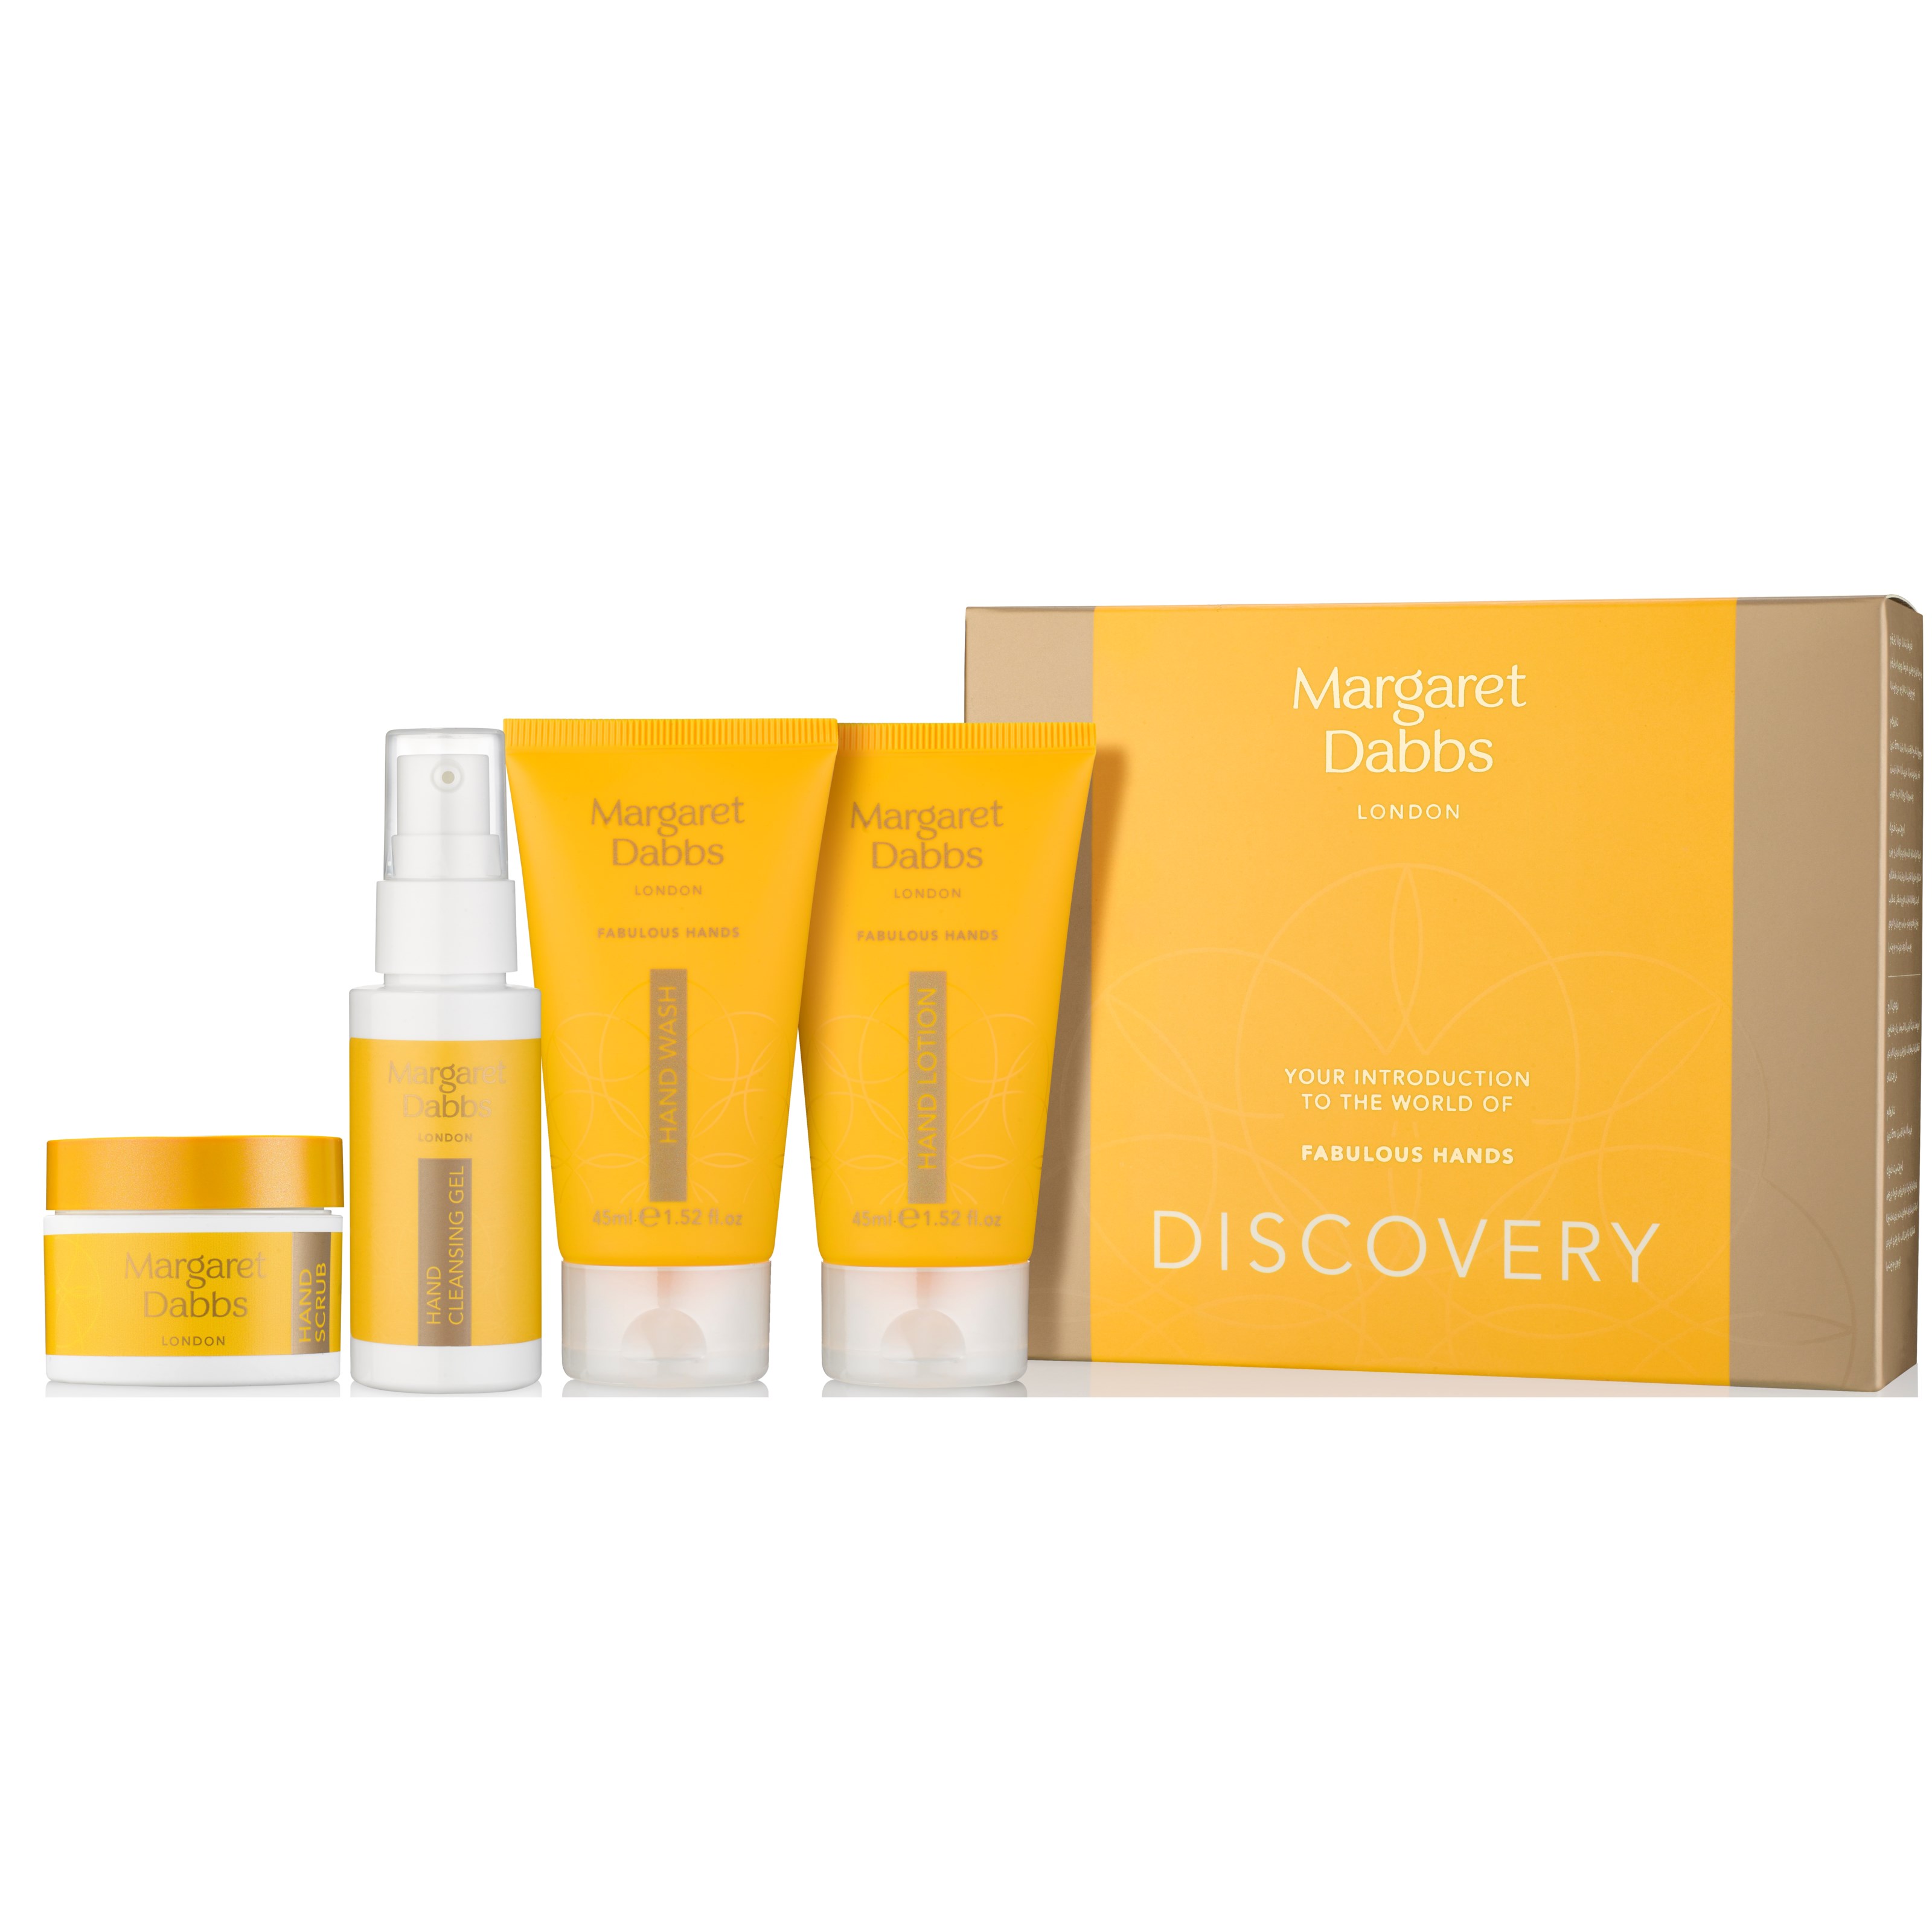 Margaret Dabbs Fabulous Hands Discovery Kit For Hands